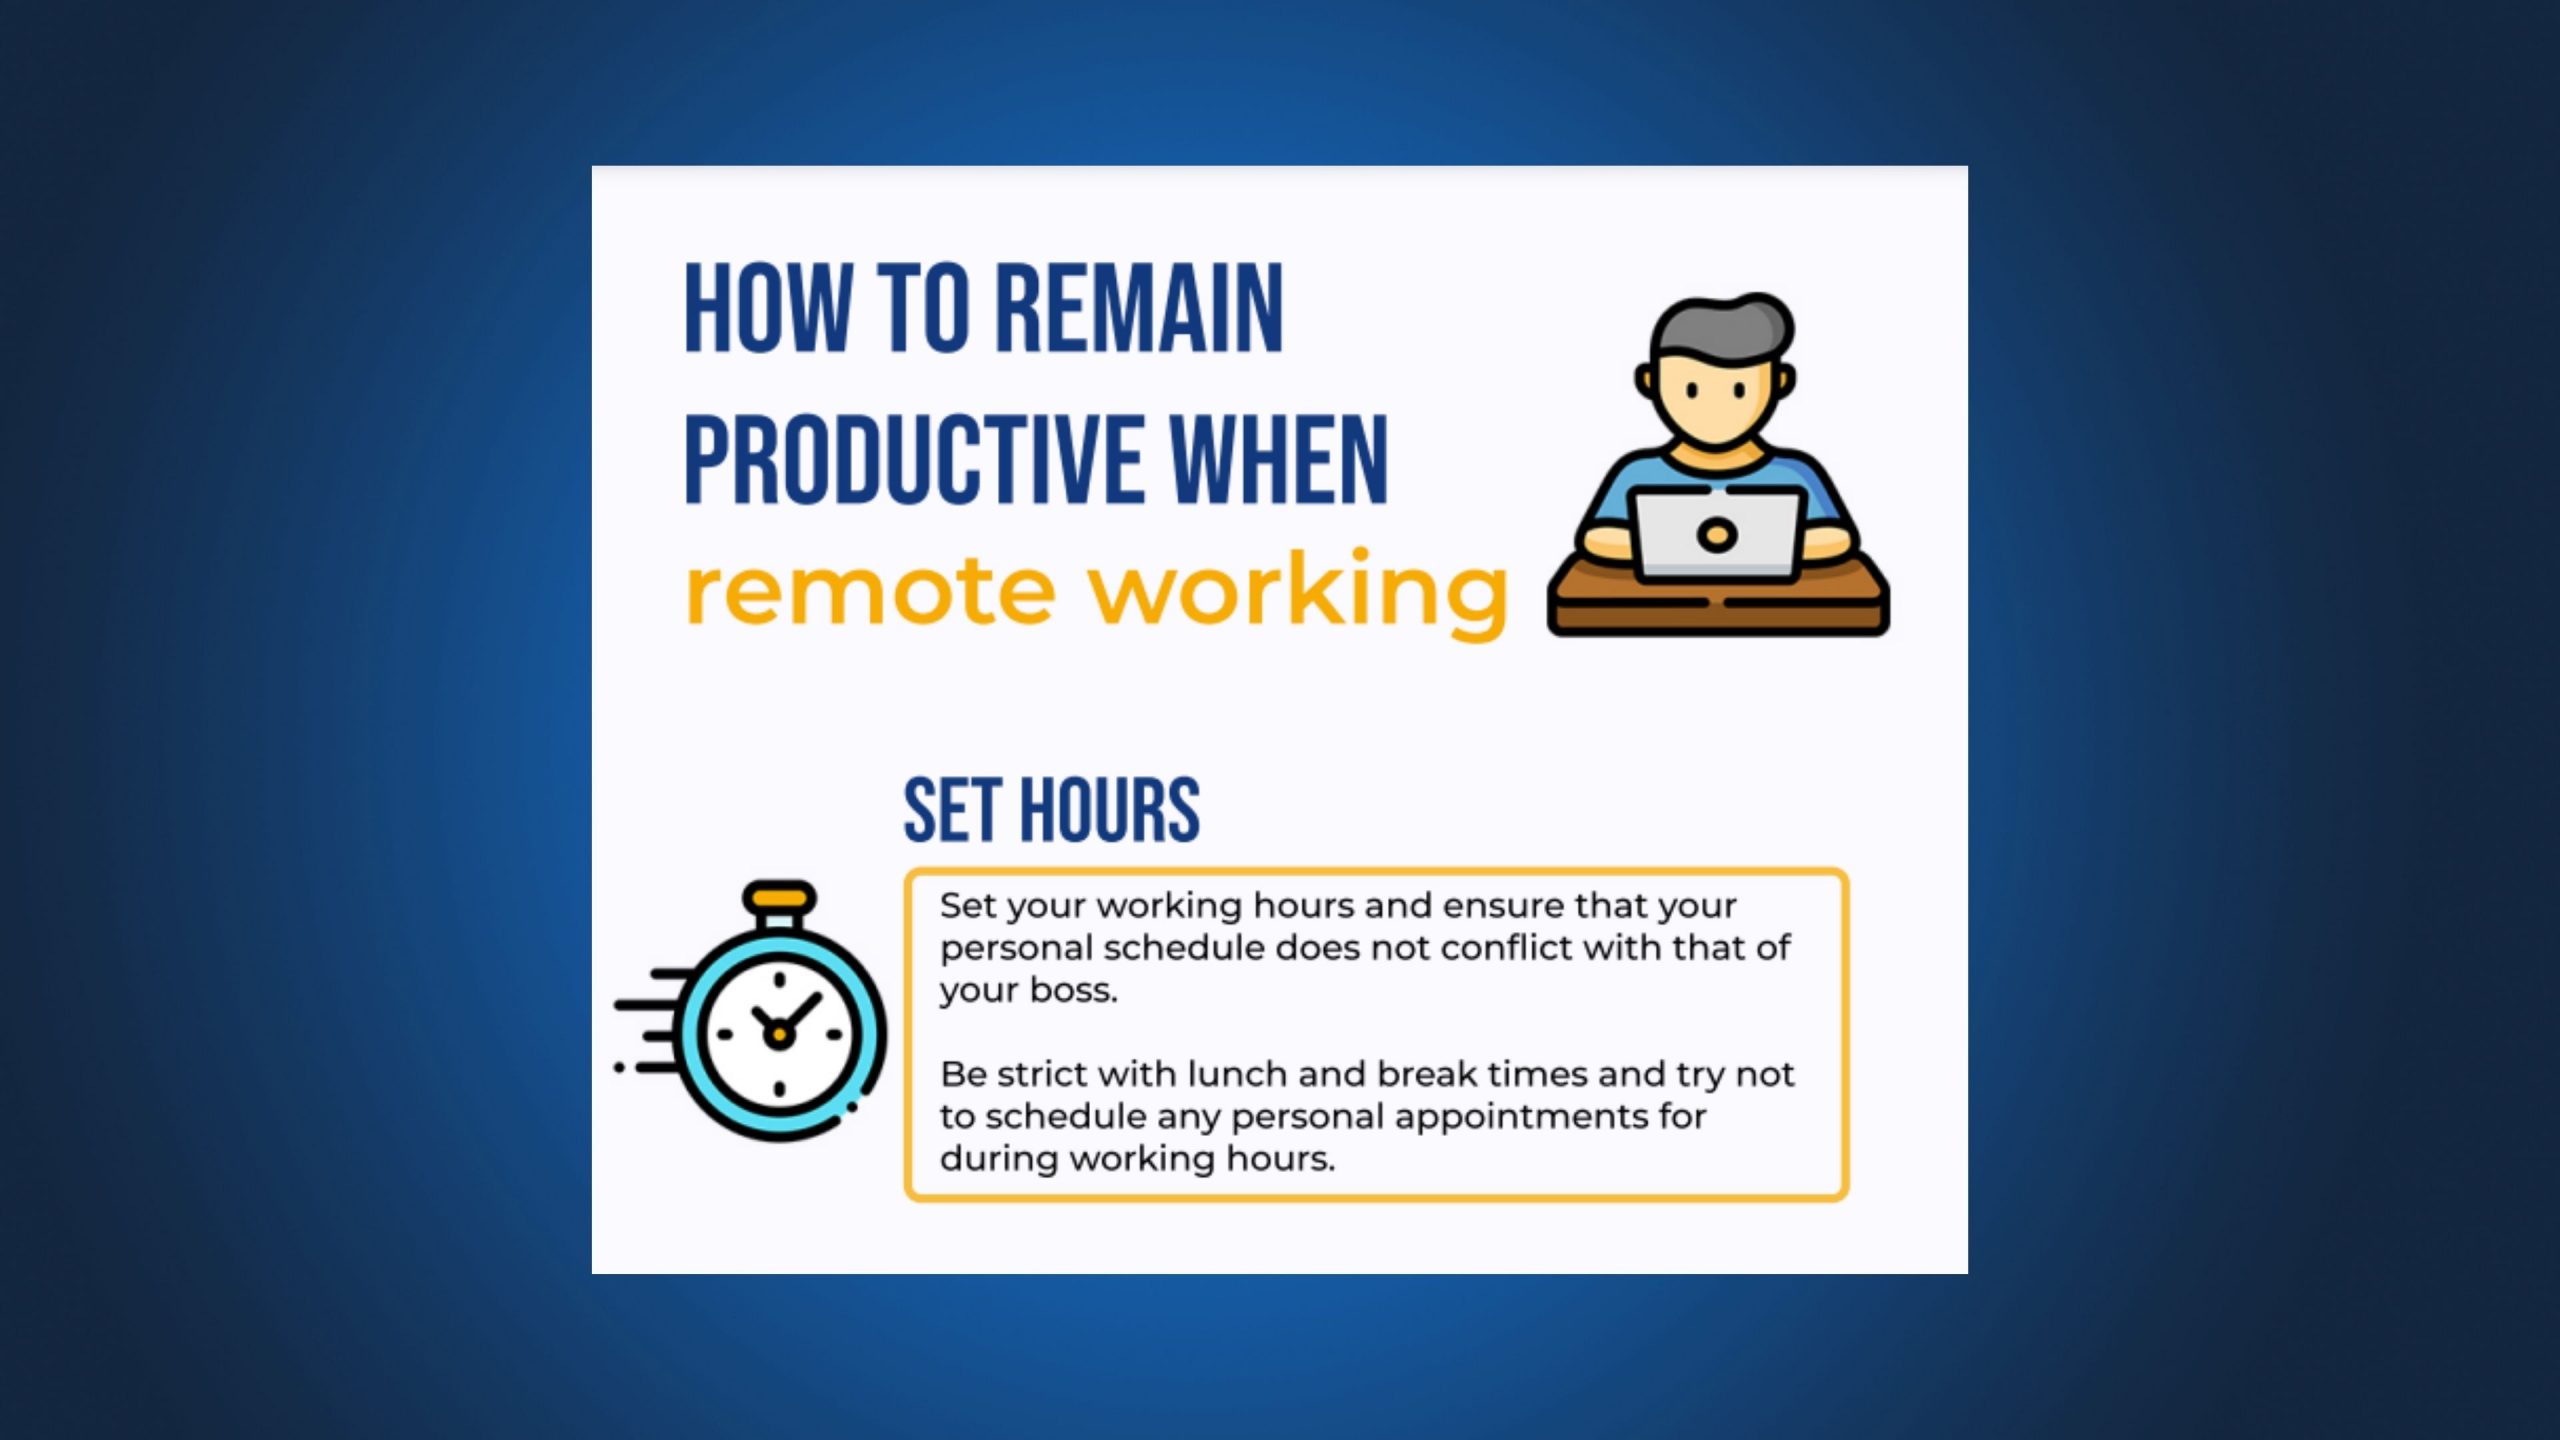 Keeping Productive when Remote Working Infographic